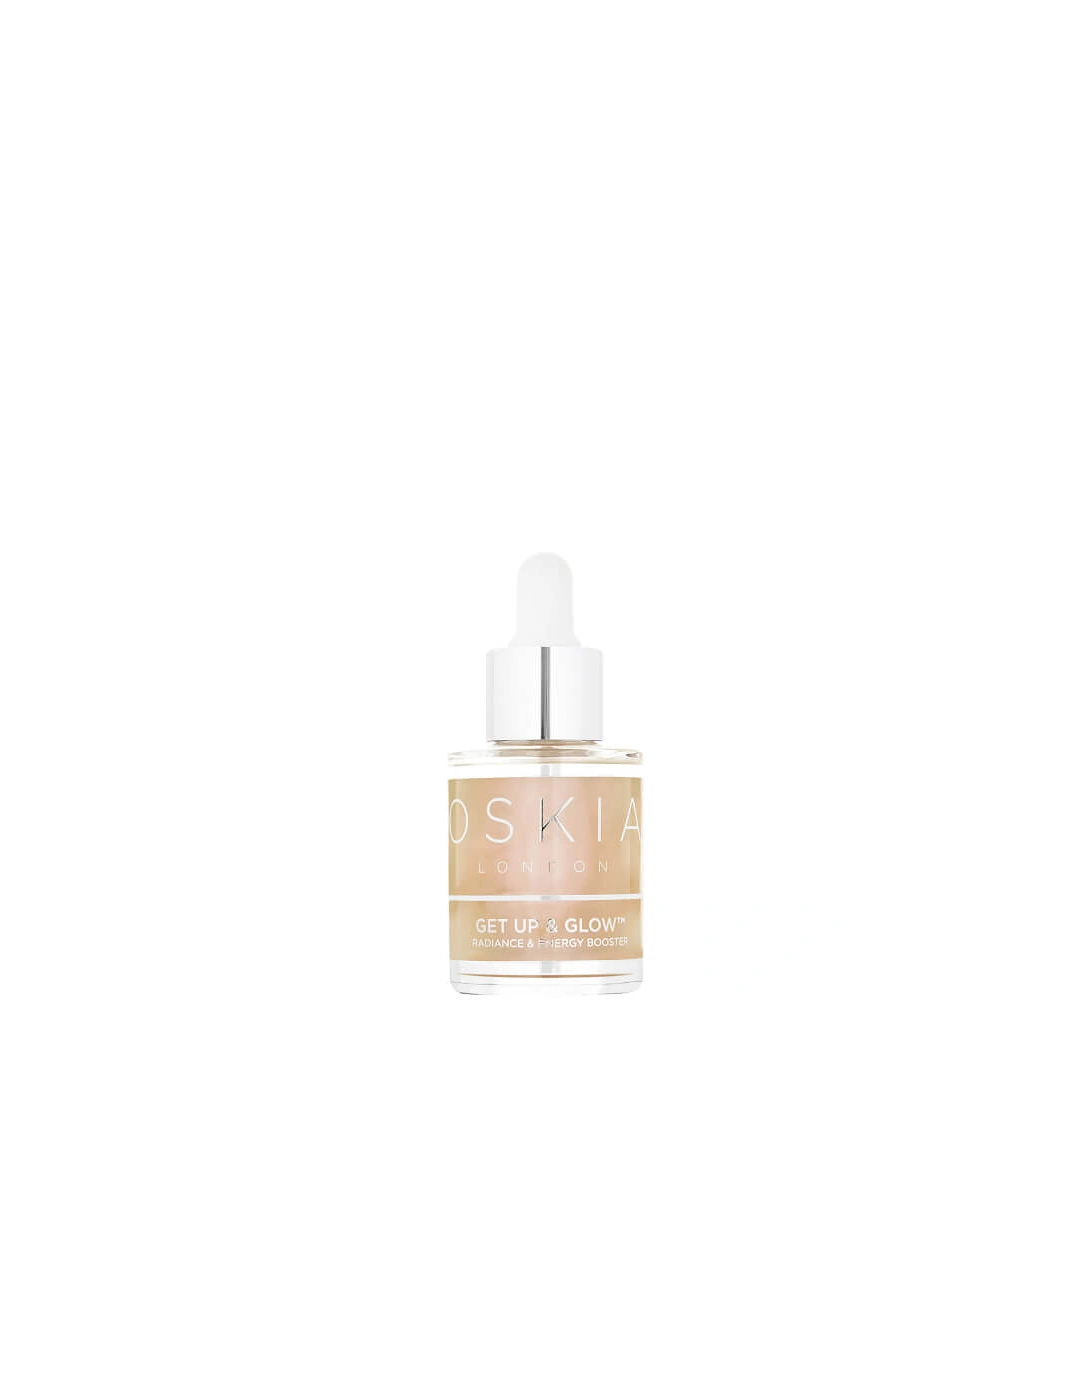 Get Up and Glow (30ml) - OSKIA, 2 of 1